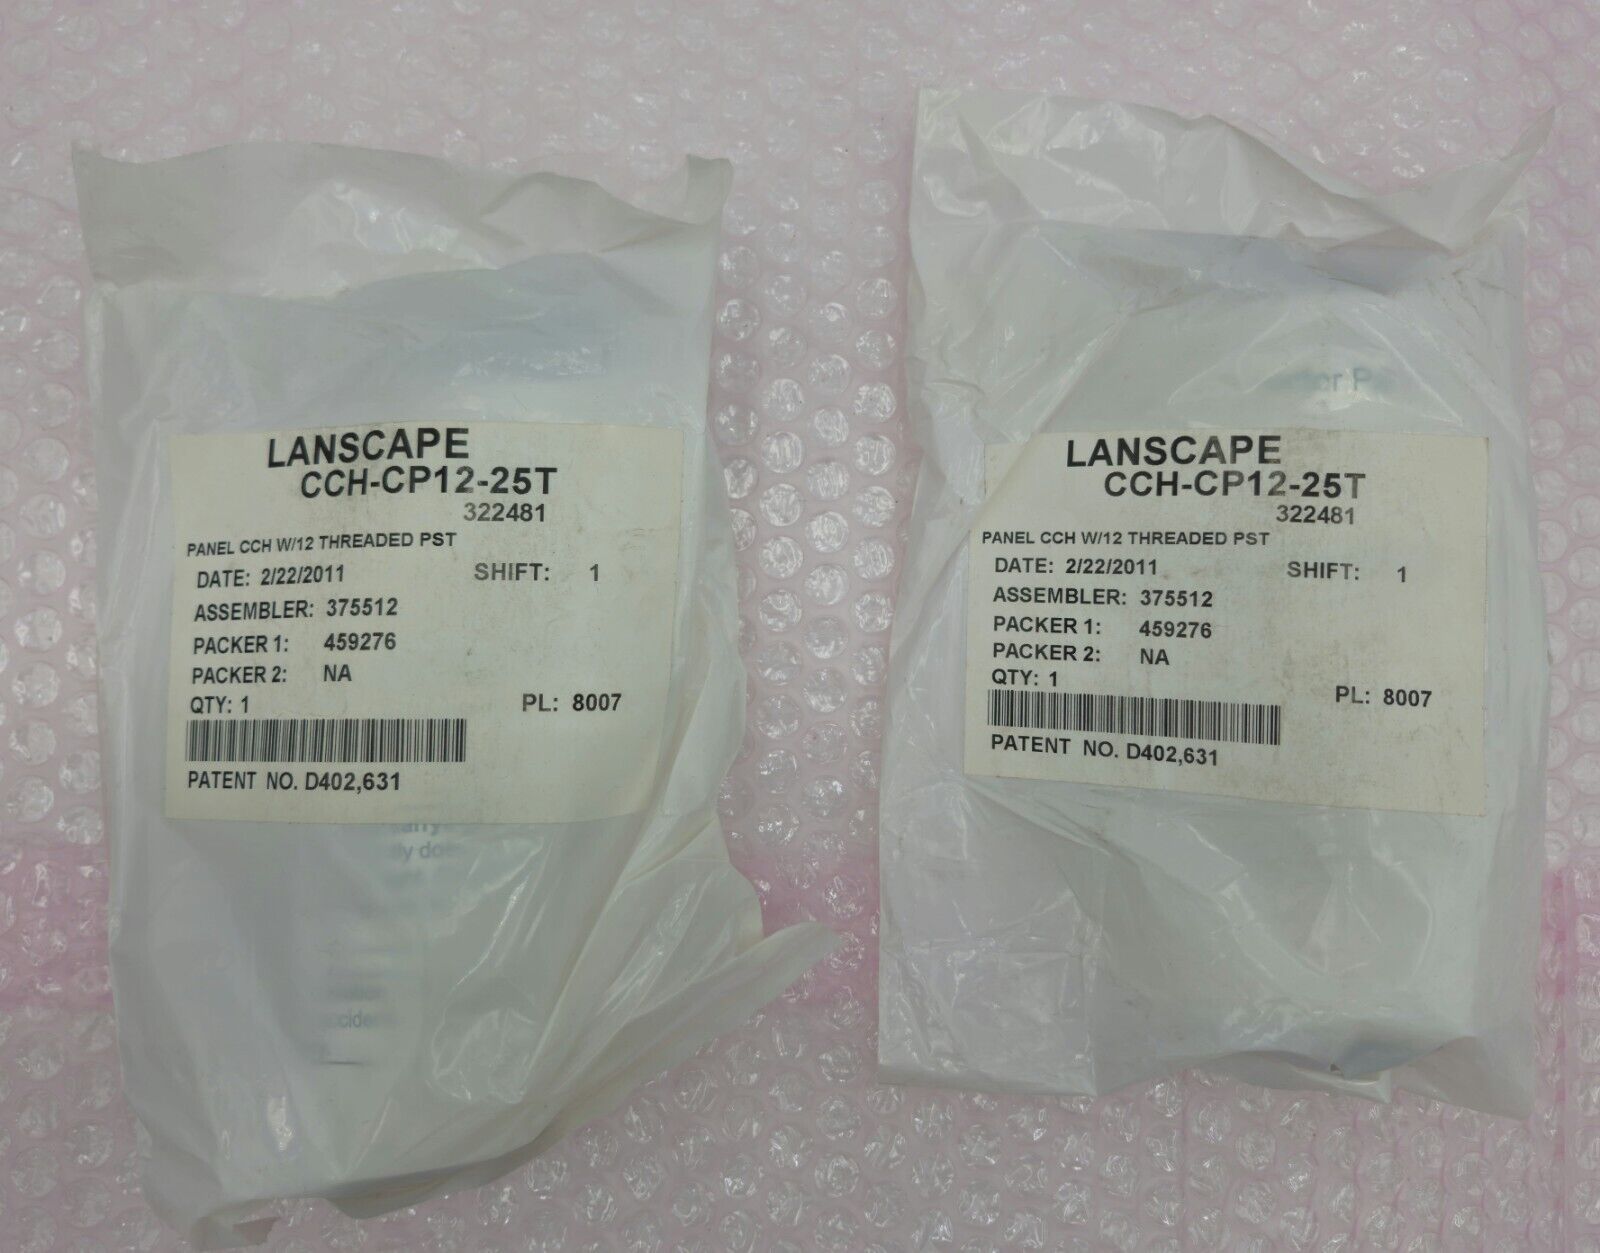 CORNING LANSCAPE CCH-CP12-25T 322481 (LOT OF 2) NEW